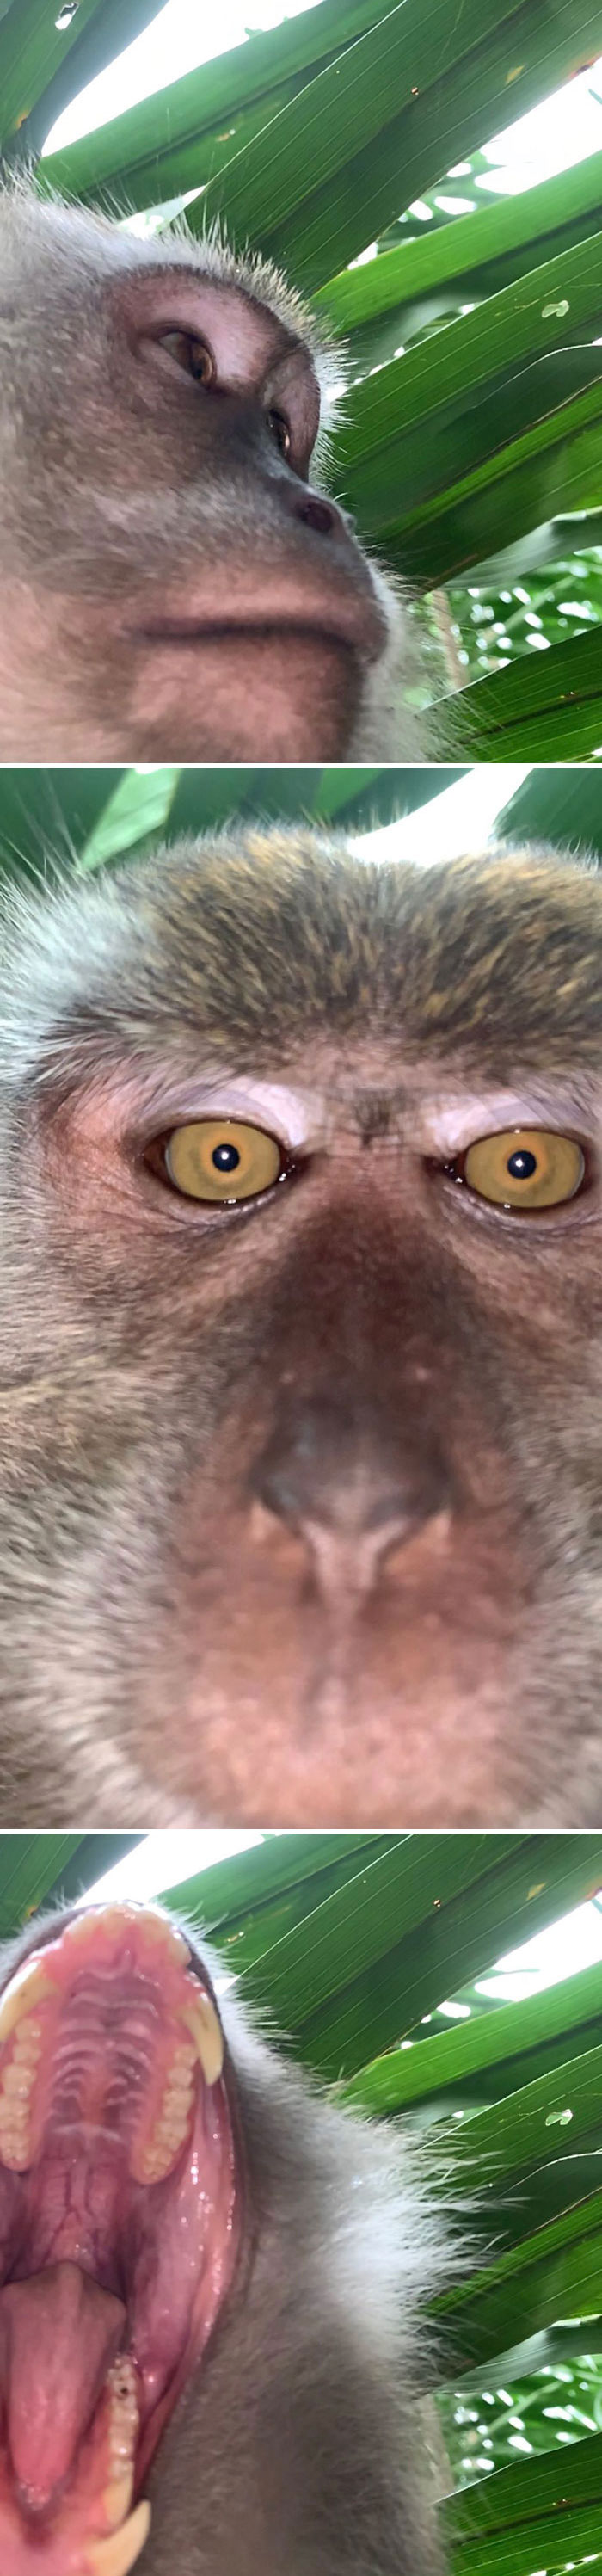 Monkey Steals Guy’s Phone, ‘Takes’ A Bunch Of Selfies